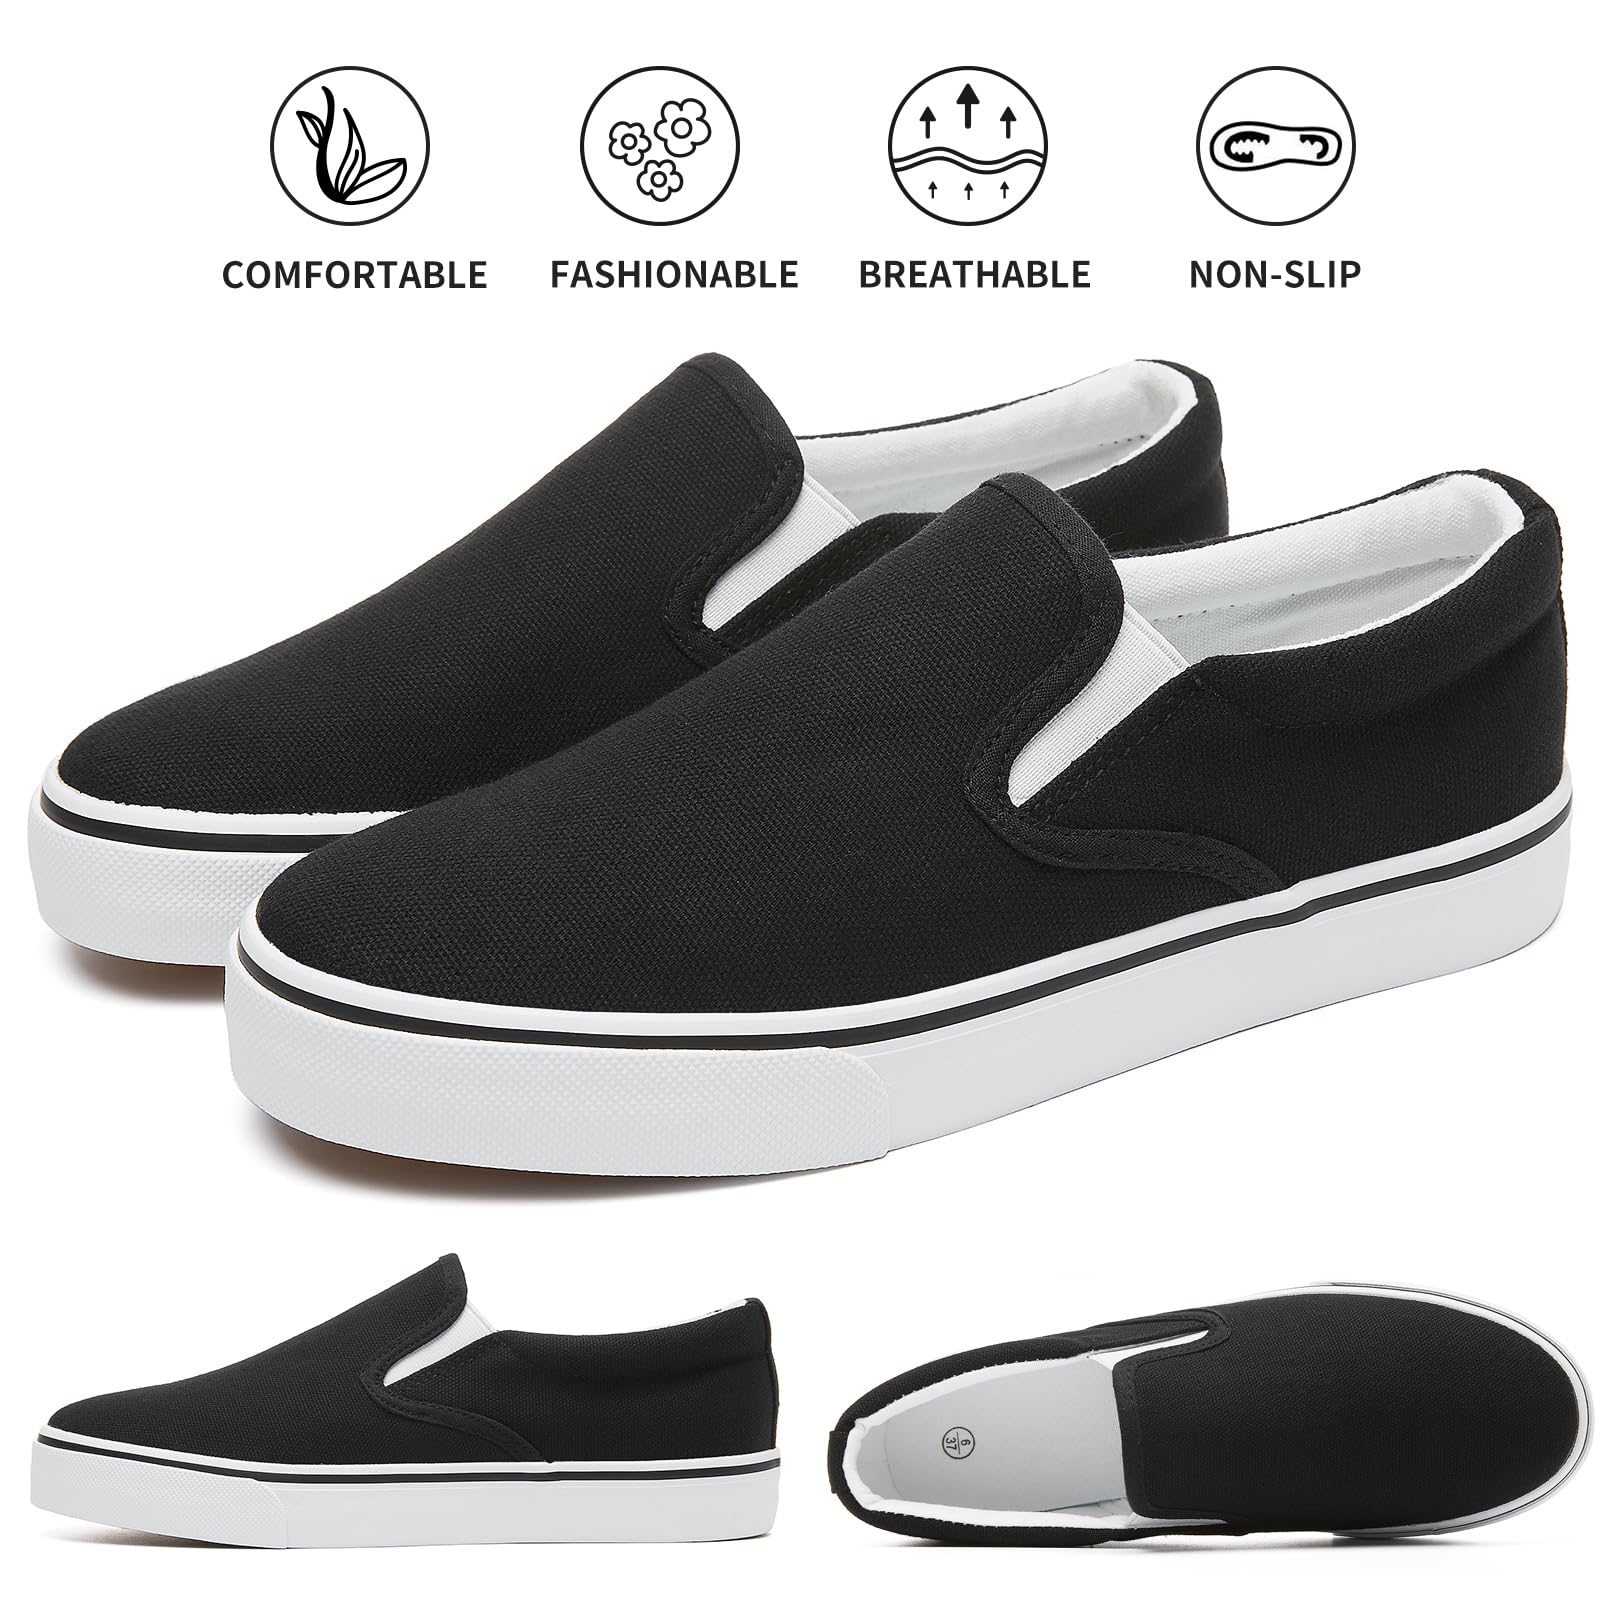 Women's Slip on Sneakers Womens Canvas Slip on Shoes Fashion Canvas Sneakers for Women Non Slip Loafers Casual Shoes